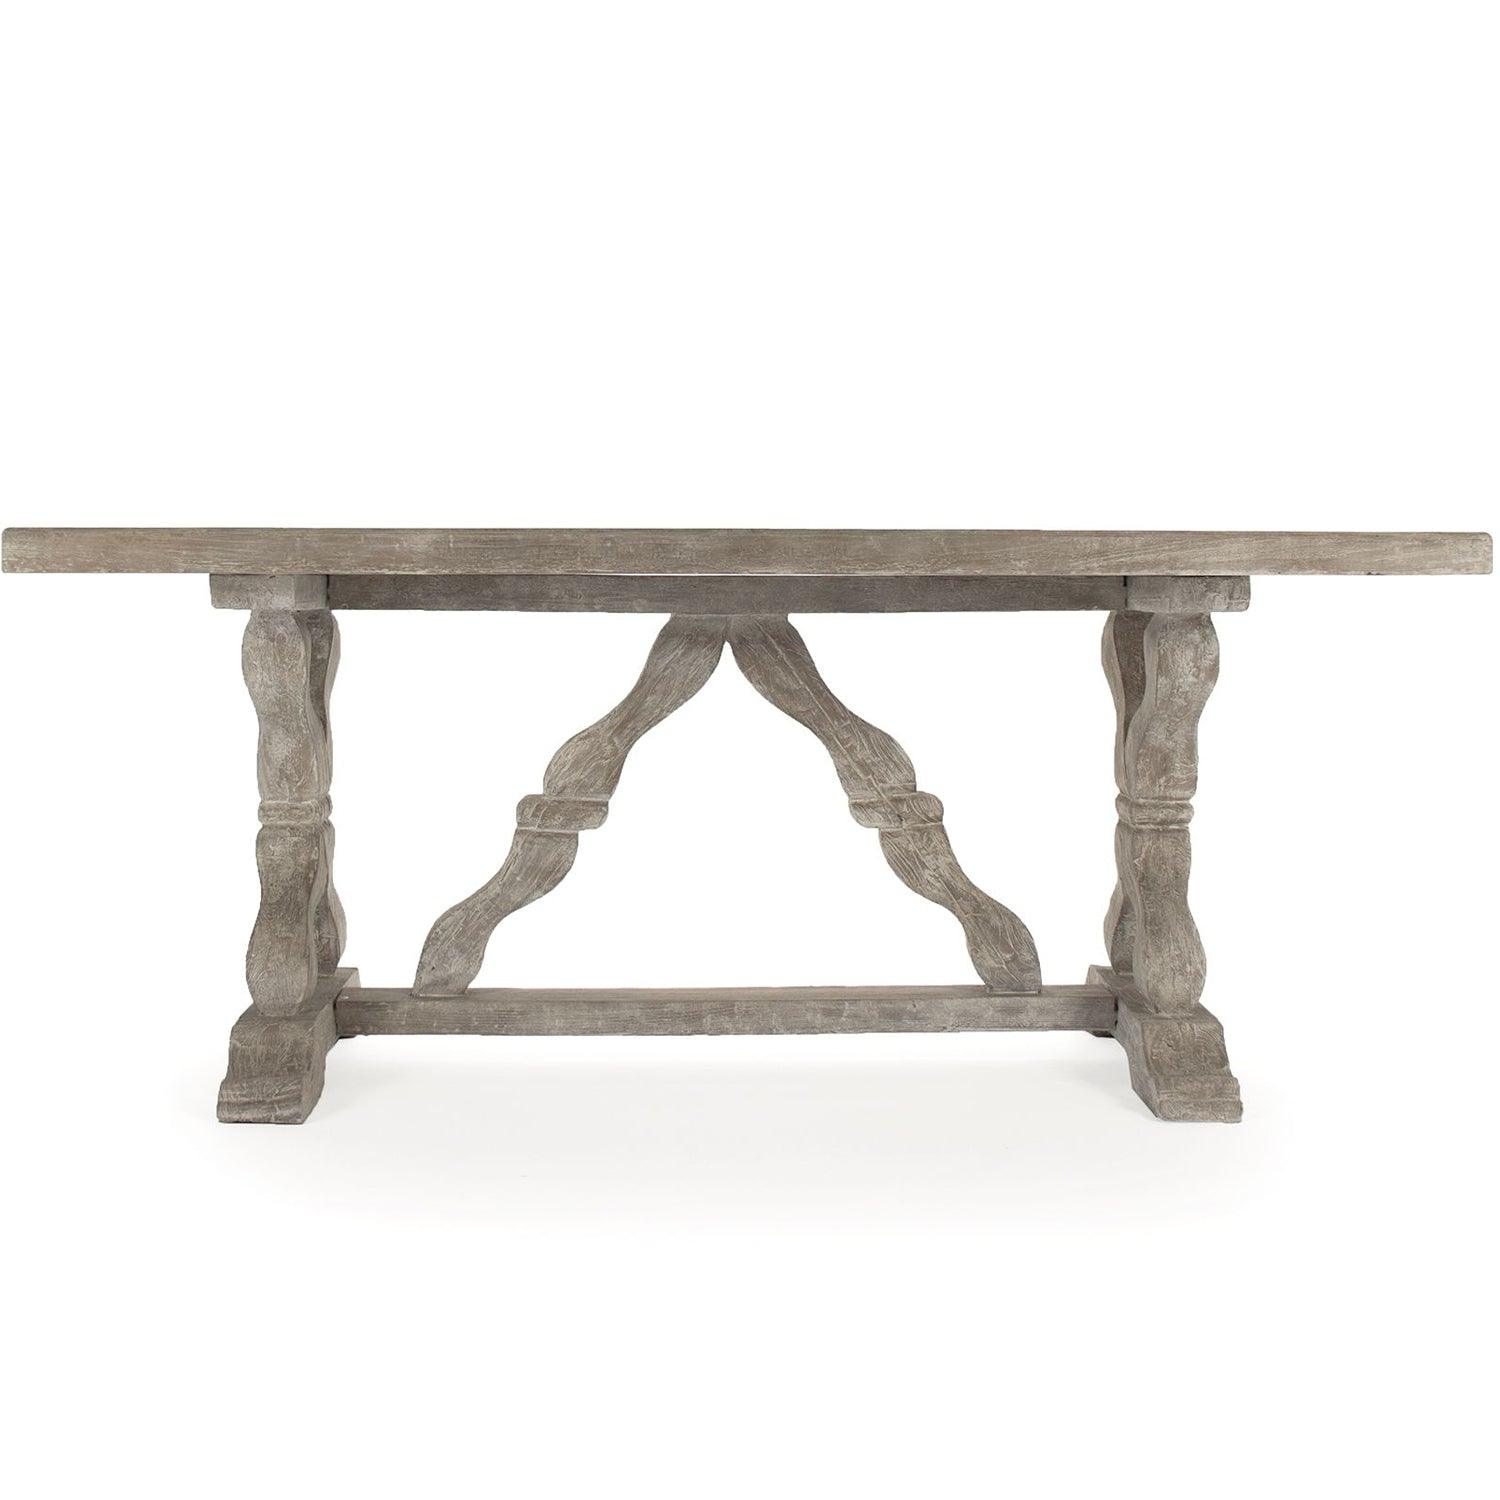 French Indoor/Outdoor Dining Table - Belle Escape